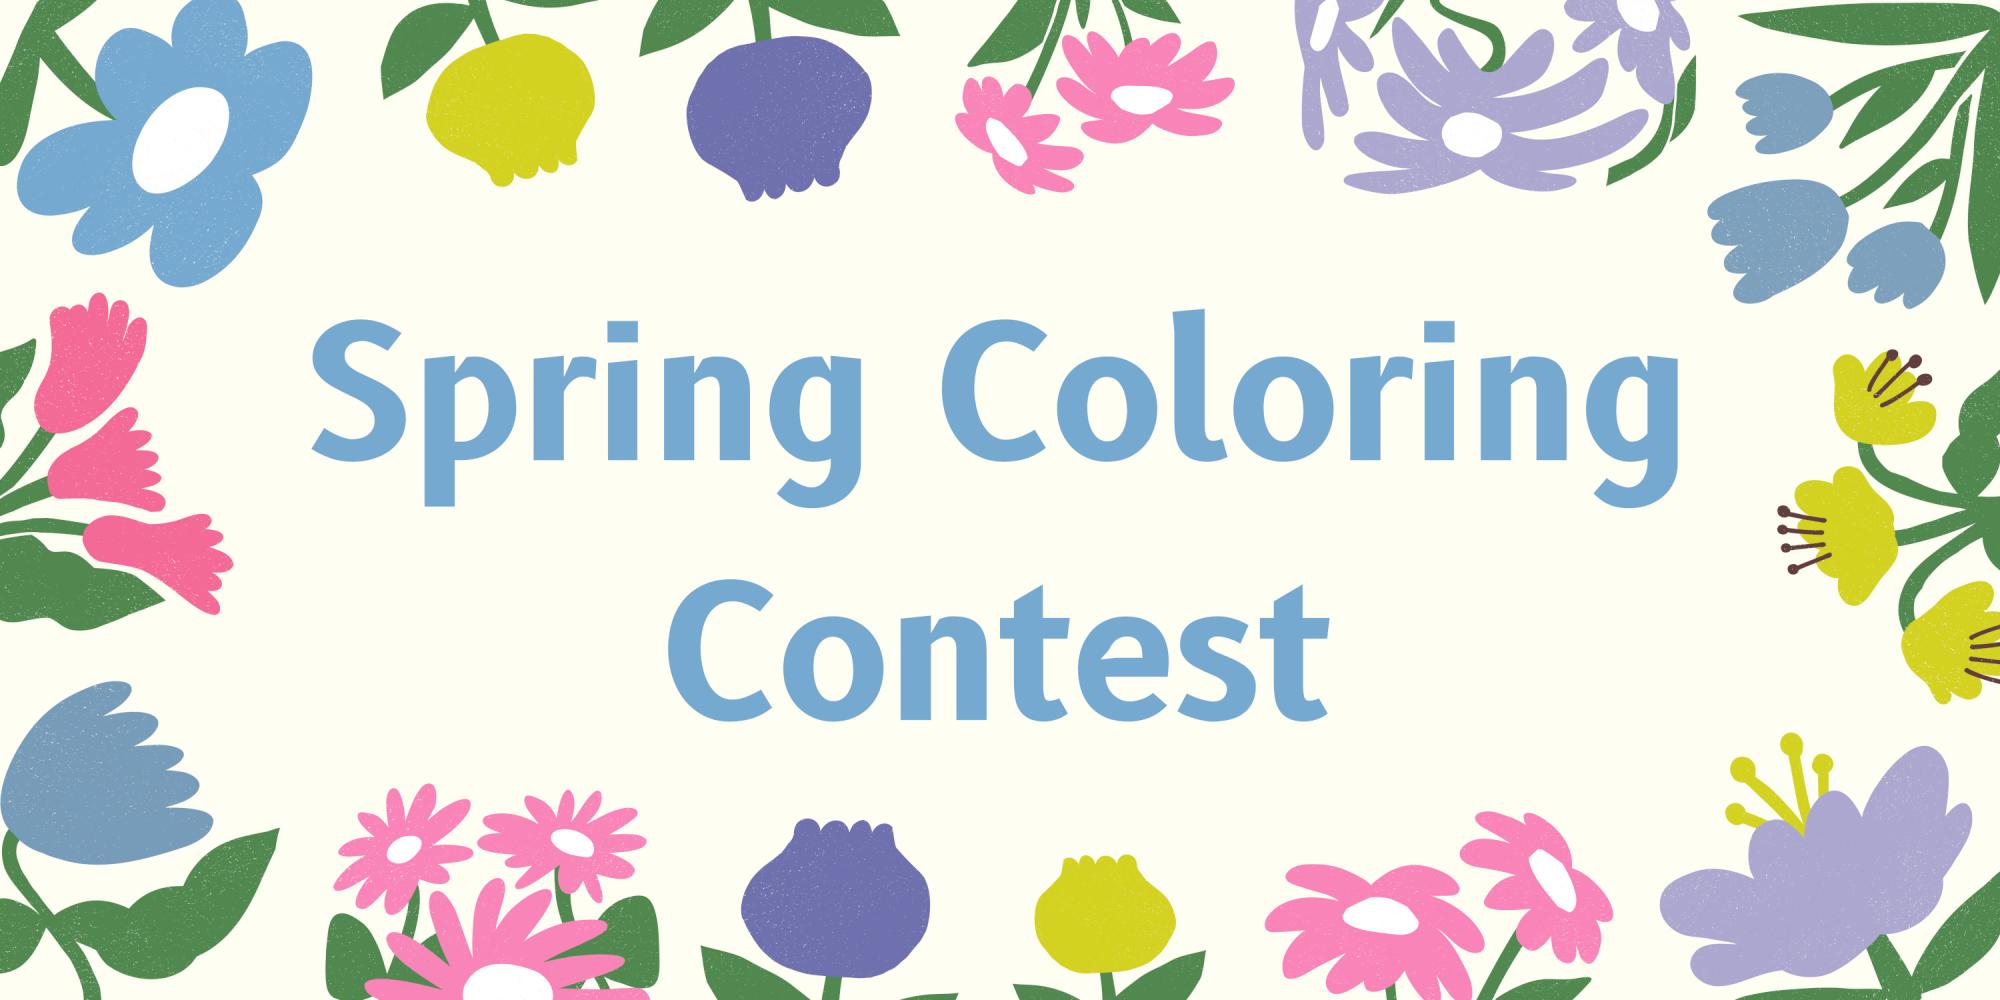 Spring Coloring Contest